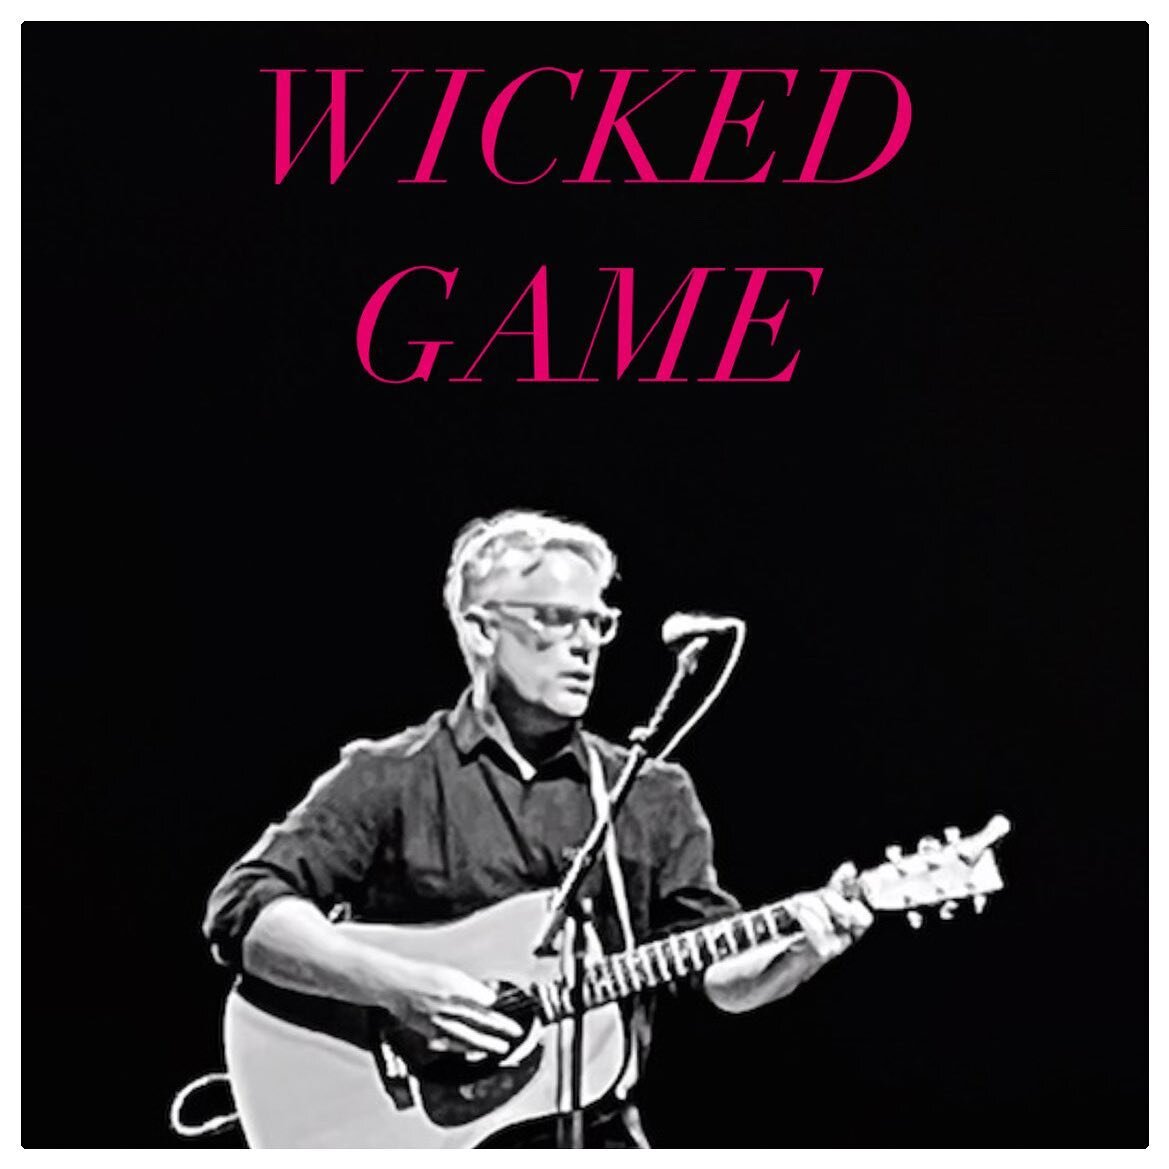 Coming out Friday (Nov. 4th) Pre-Save link in bio. &quot;Wicked Game&quot; I worked with  @craigmeyersteakhouse (producer) and think our version of the great song by Chris Isaak turned out well....excited for y'all to hear it! #newmusic #coversong @s